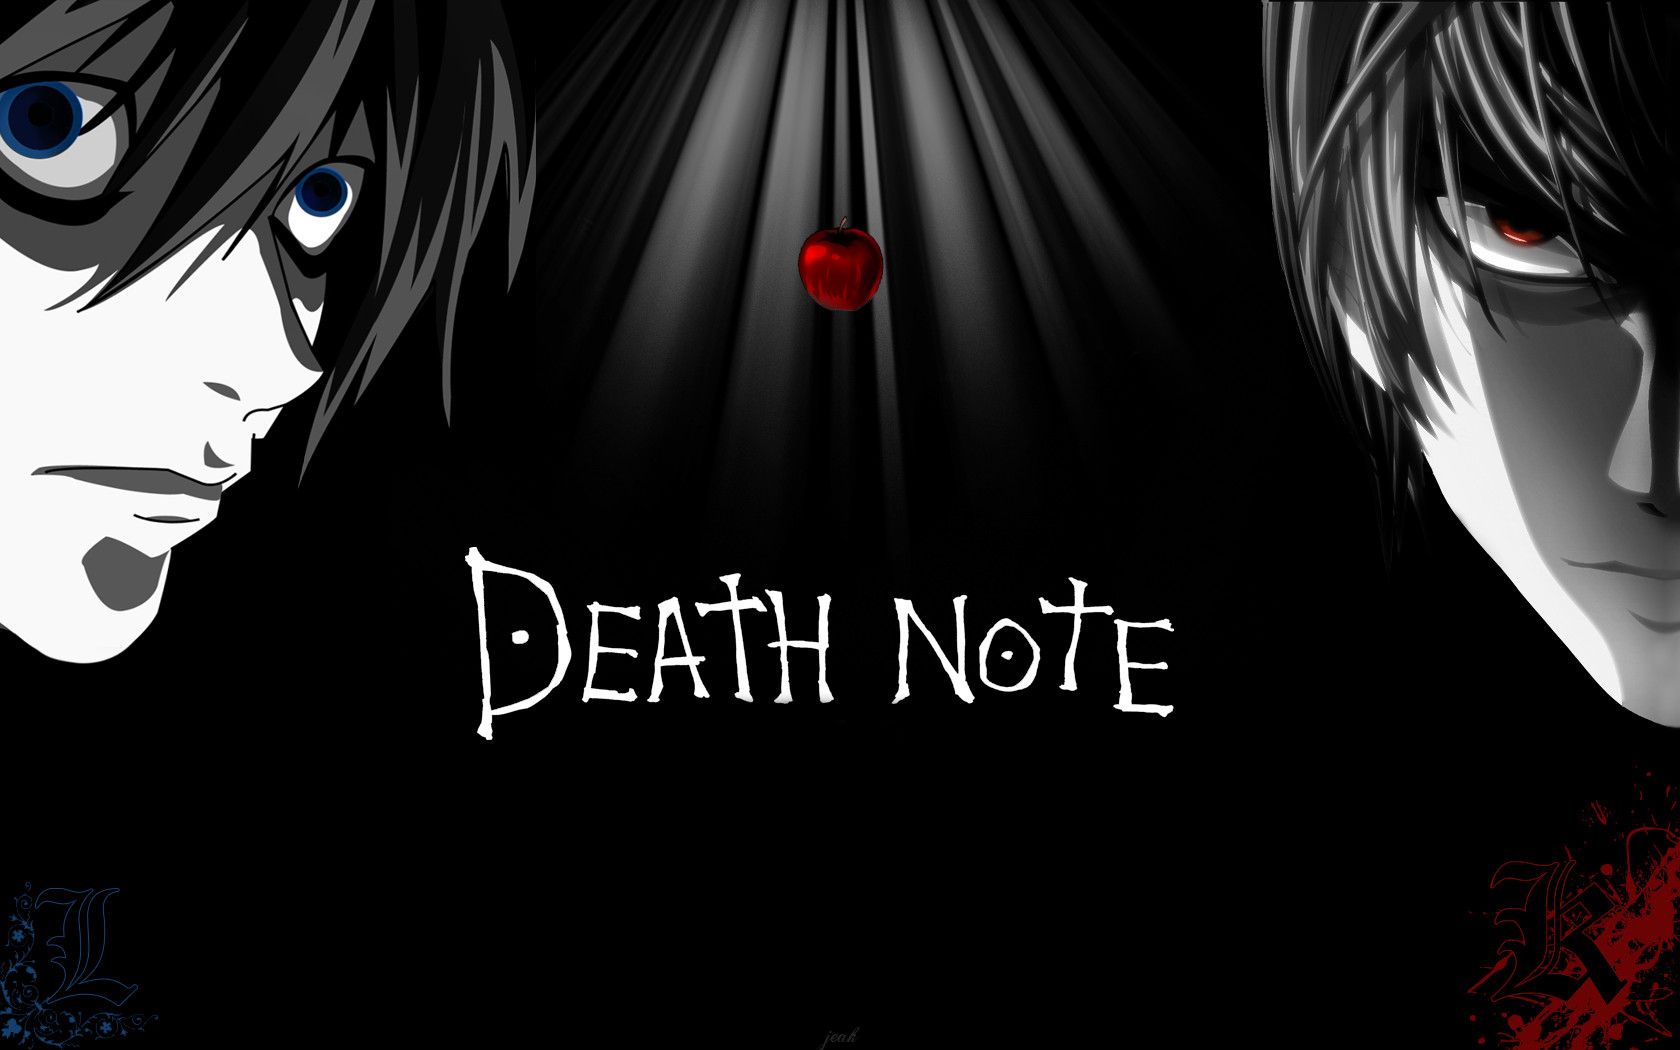 Movie Adaptation of Classic Manga Series Death Note Heading to